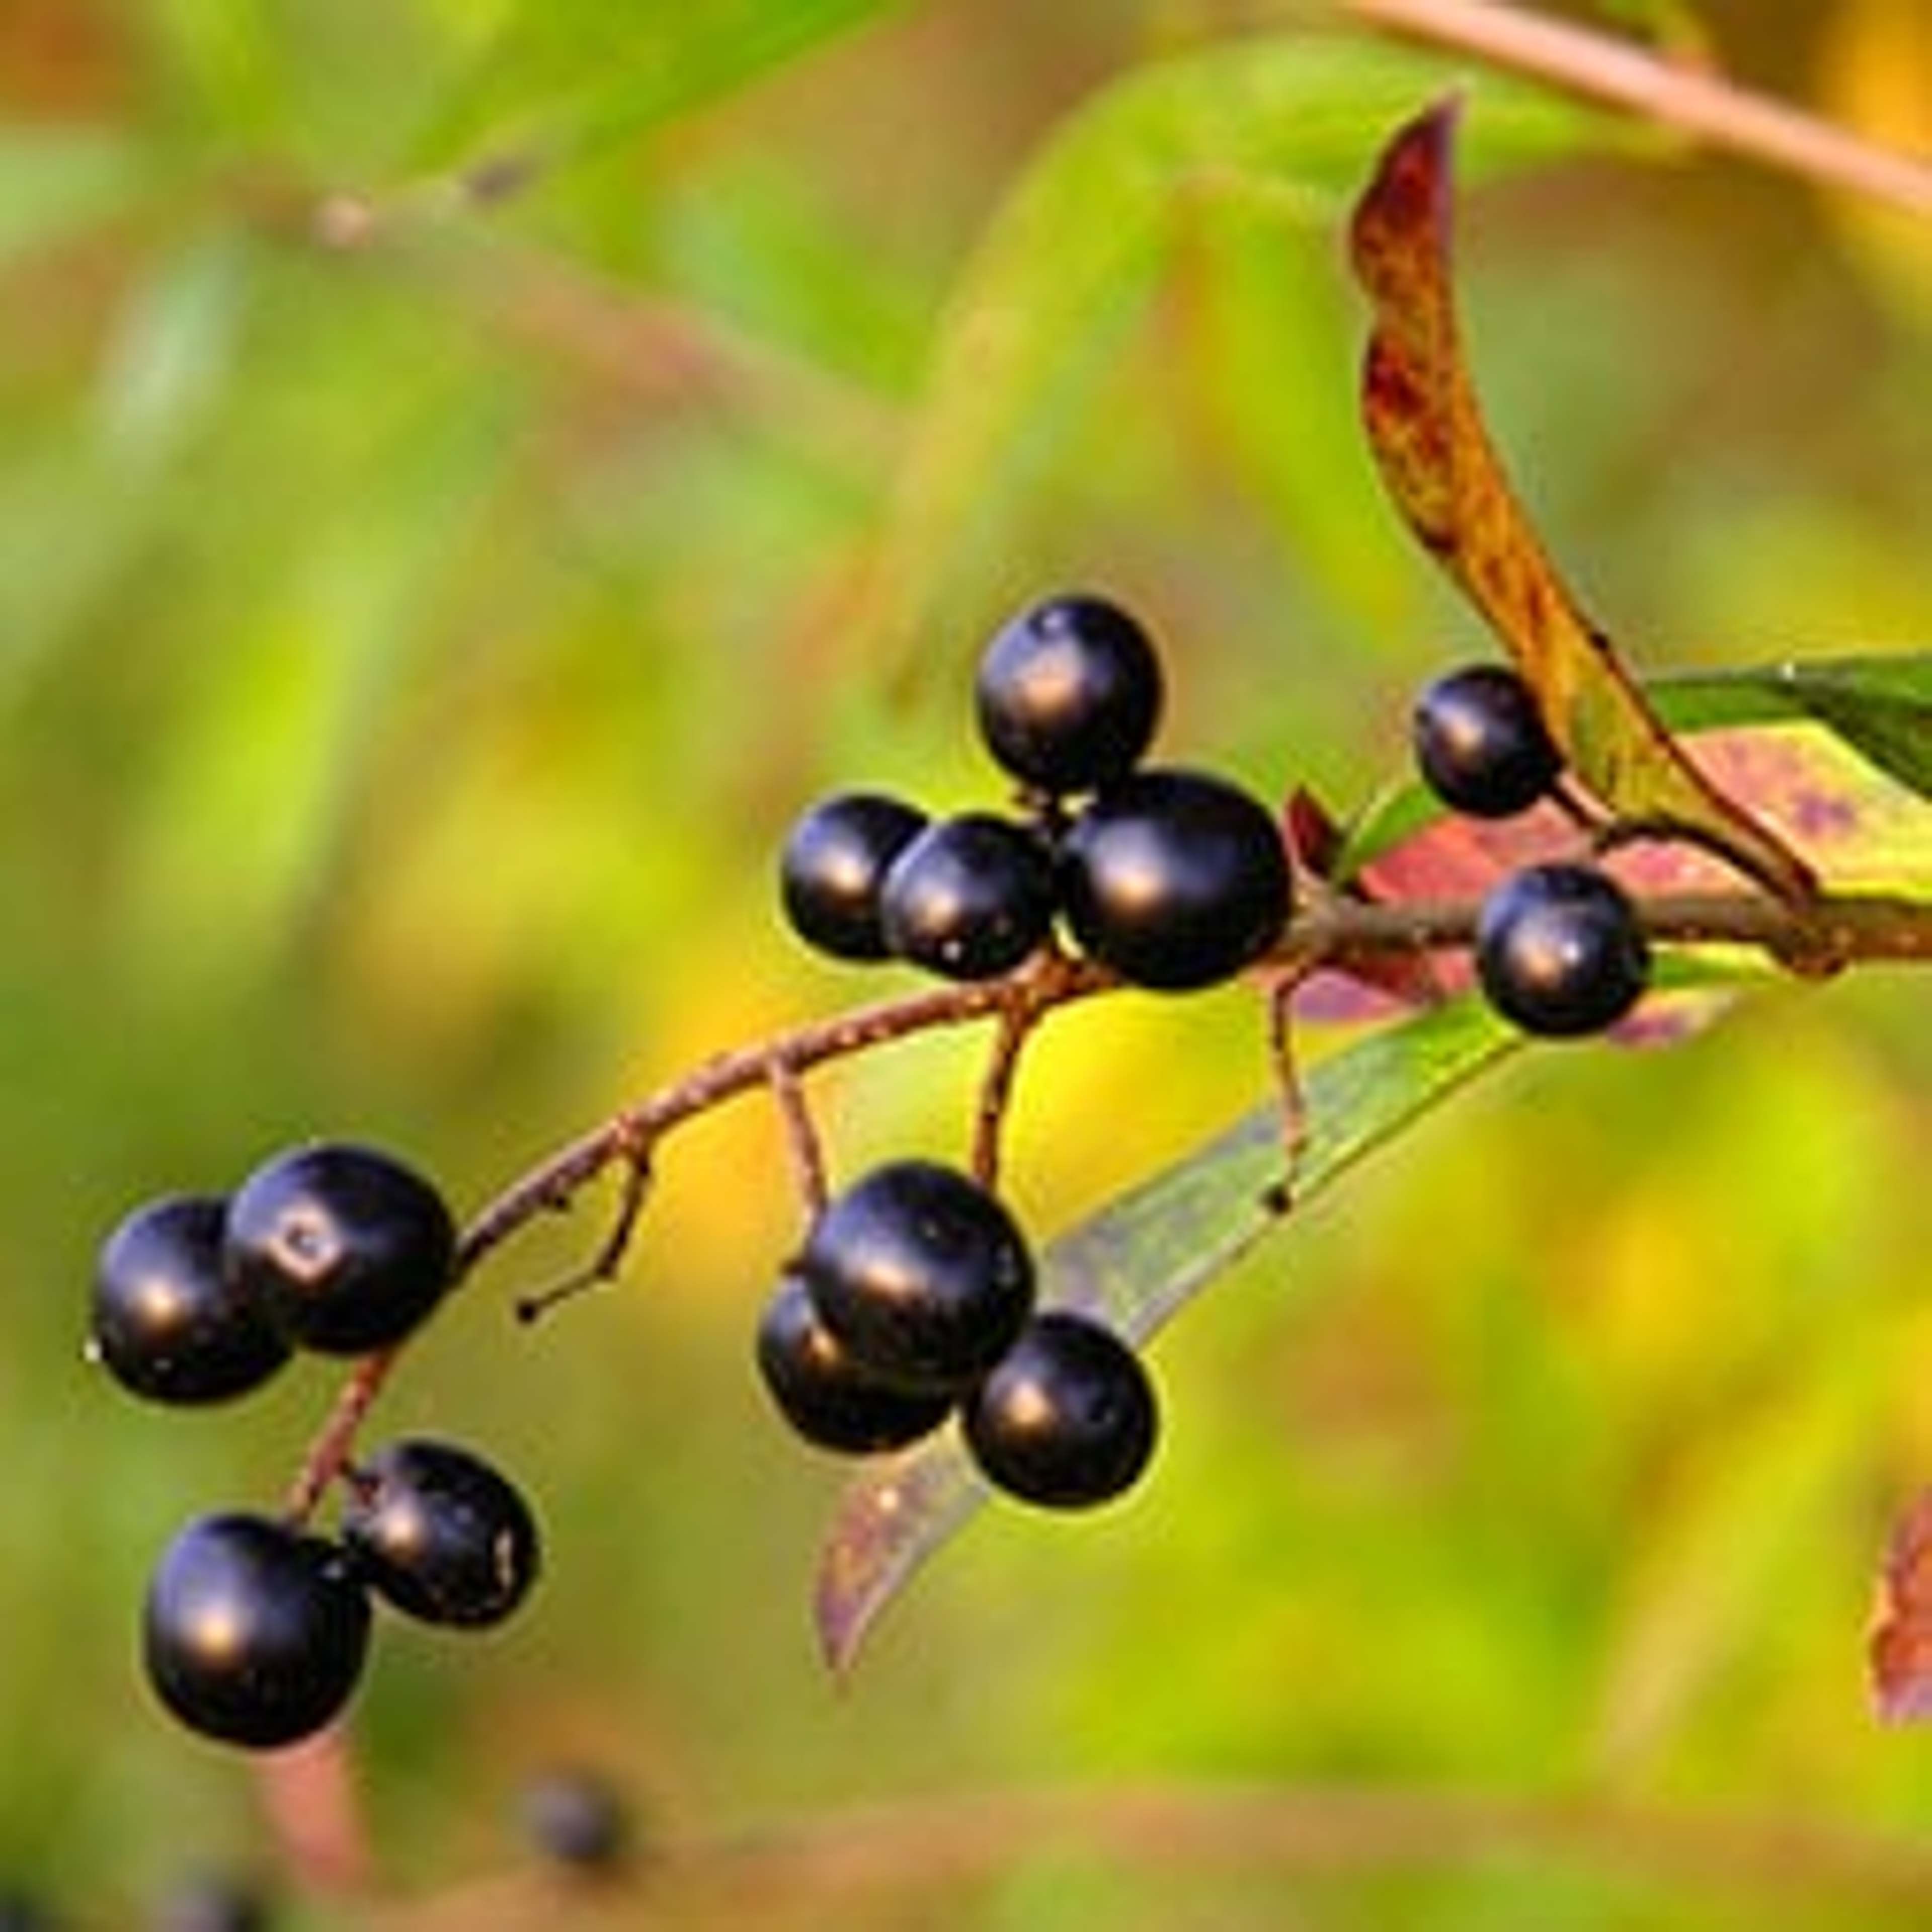 Maqui berries are particularly rich in antioxidants, vitamins, minerals, iron and vitamin C.